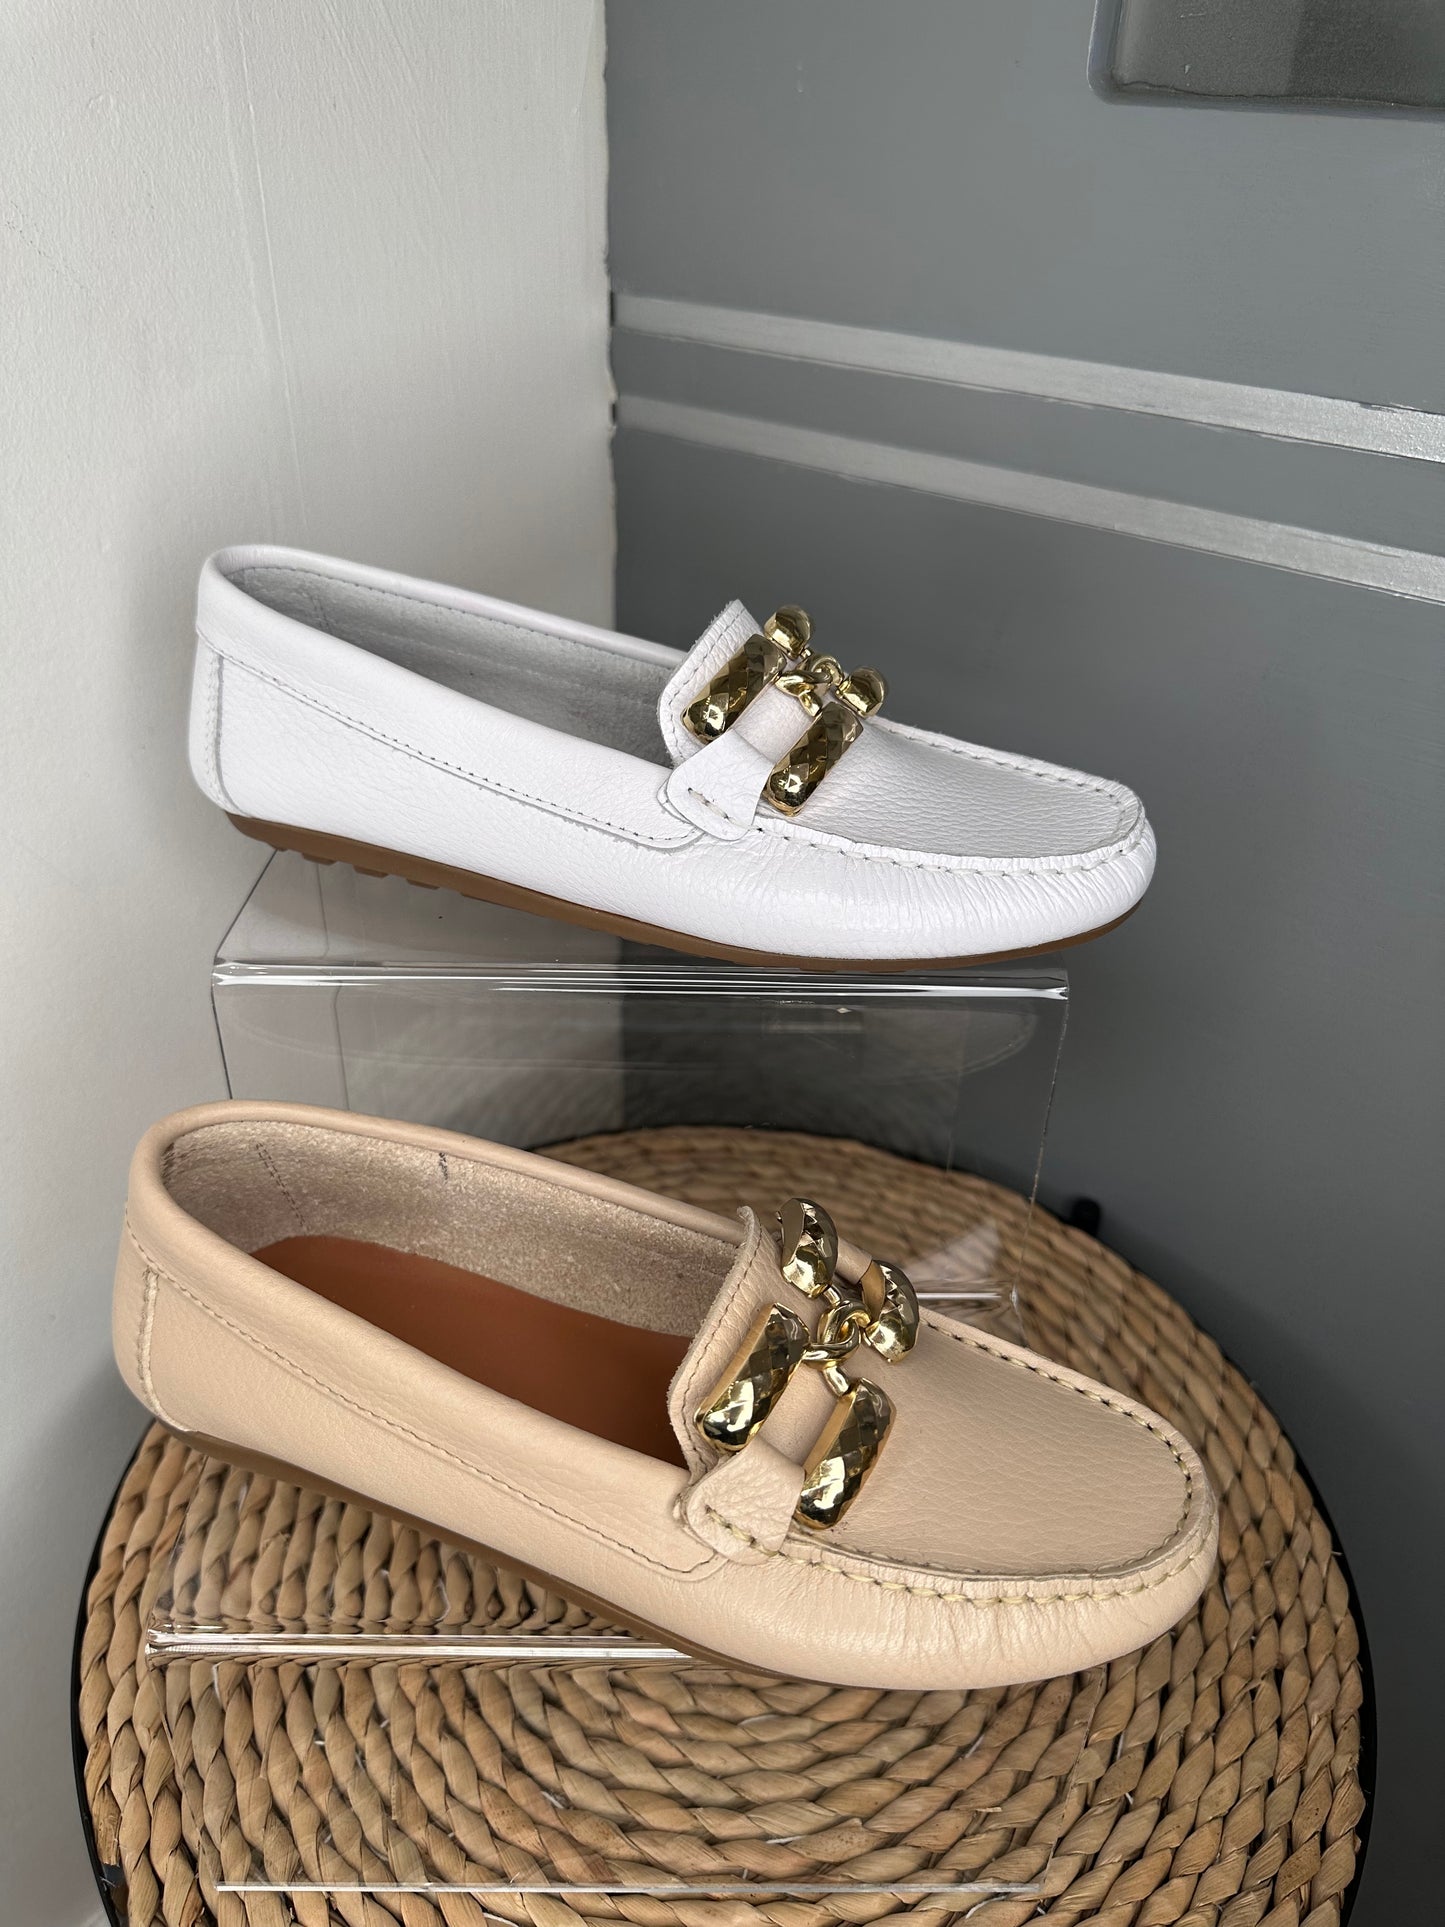 Dchicas (By Viguera) - White Soft Leather Loafer With Chunky Gold Trim